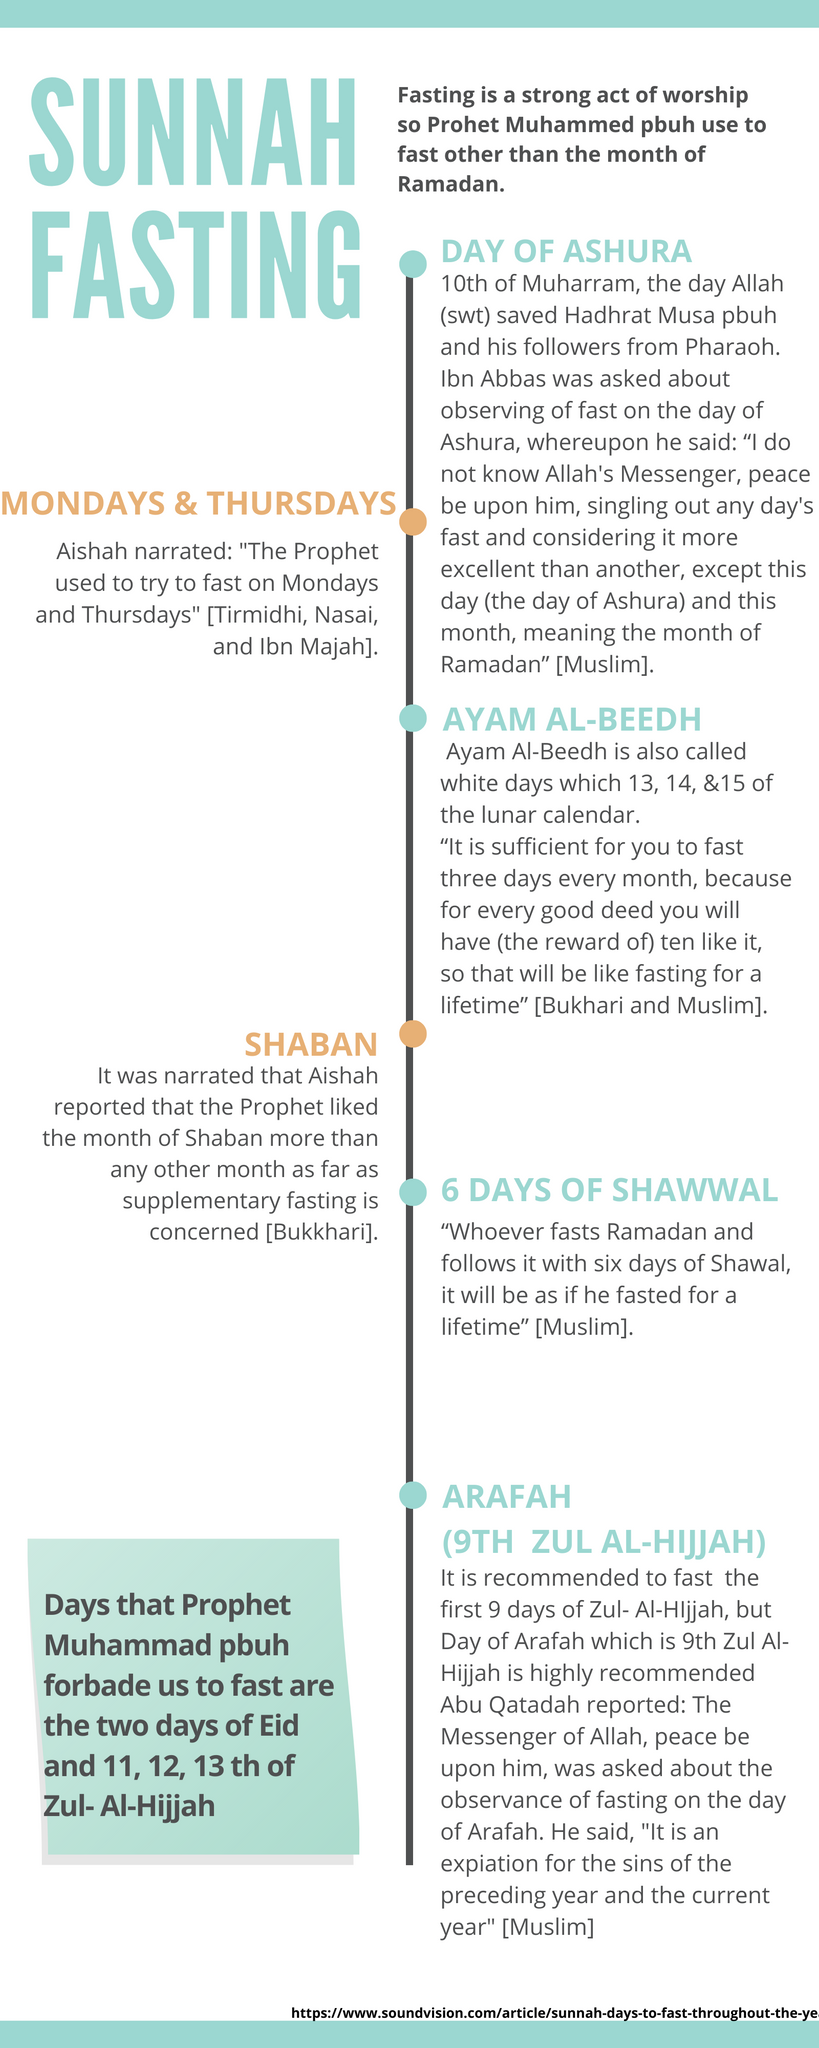 Infographic: Where do your Ramadan dates come from?, Infographic News